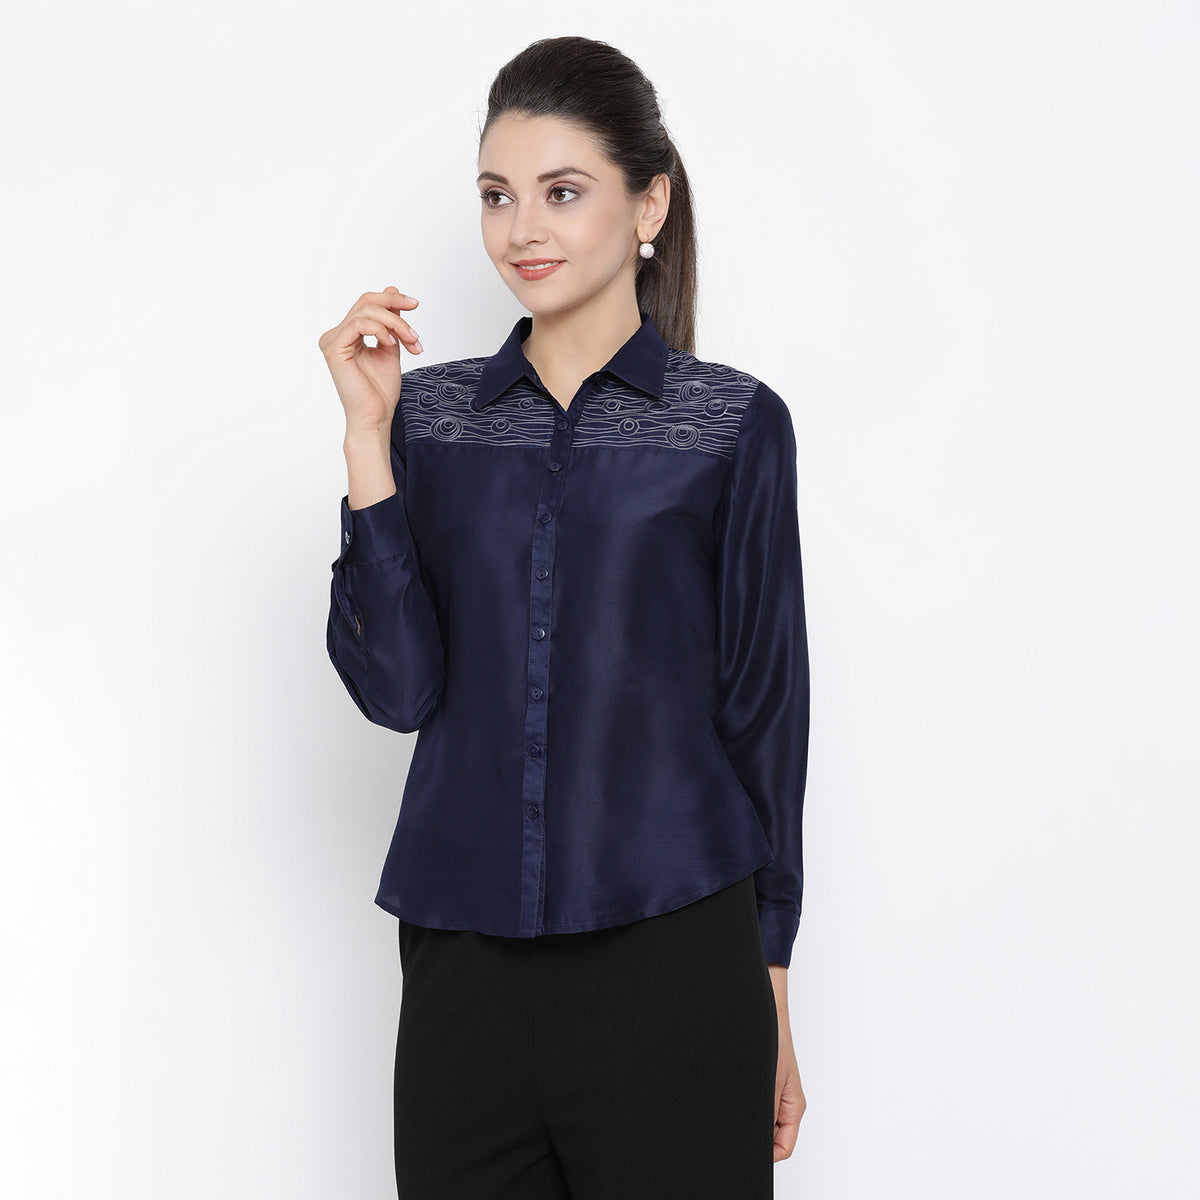 Blue Top With Thread Embroidery On Yoke